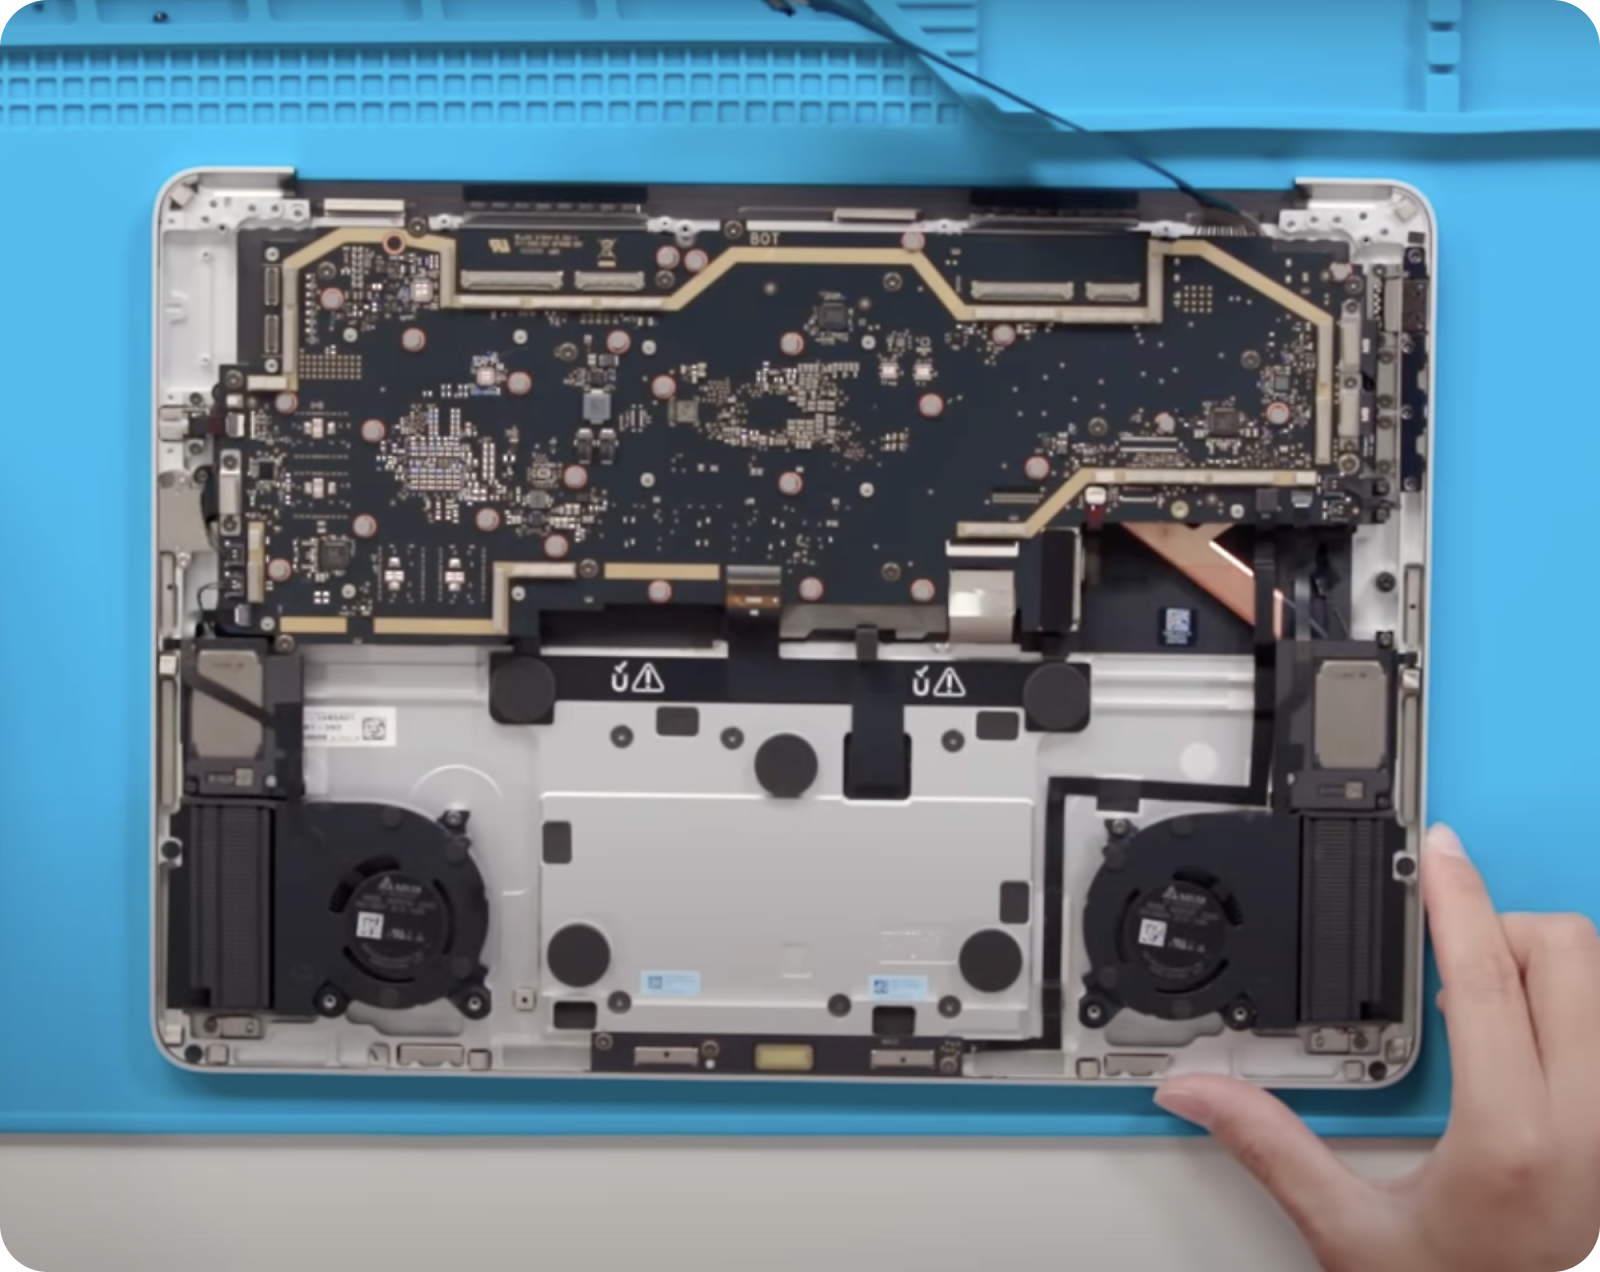 An open laptop with the cover removed, revealing its internal components including the motherboard, cooling fans